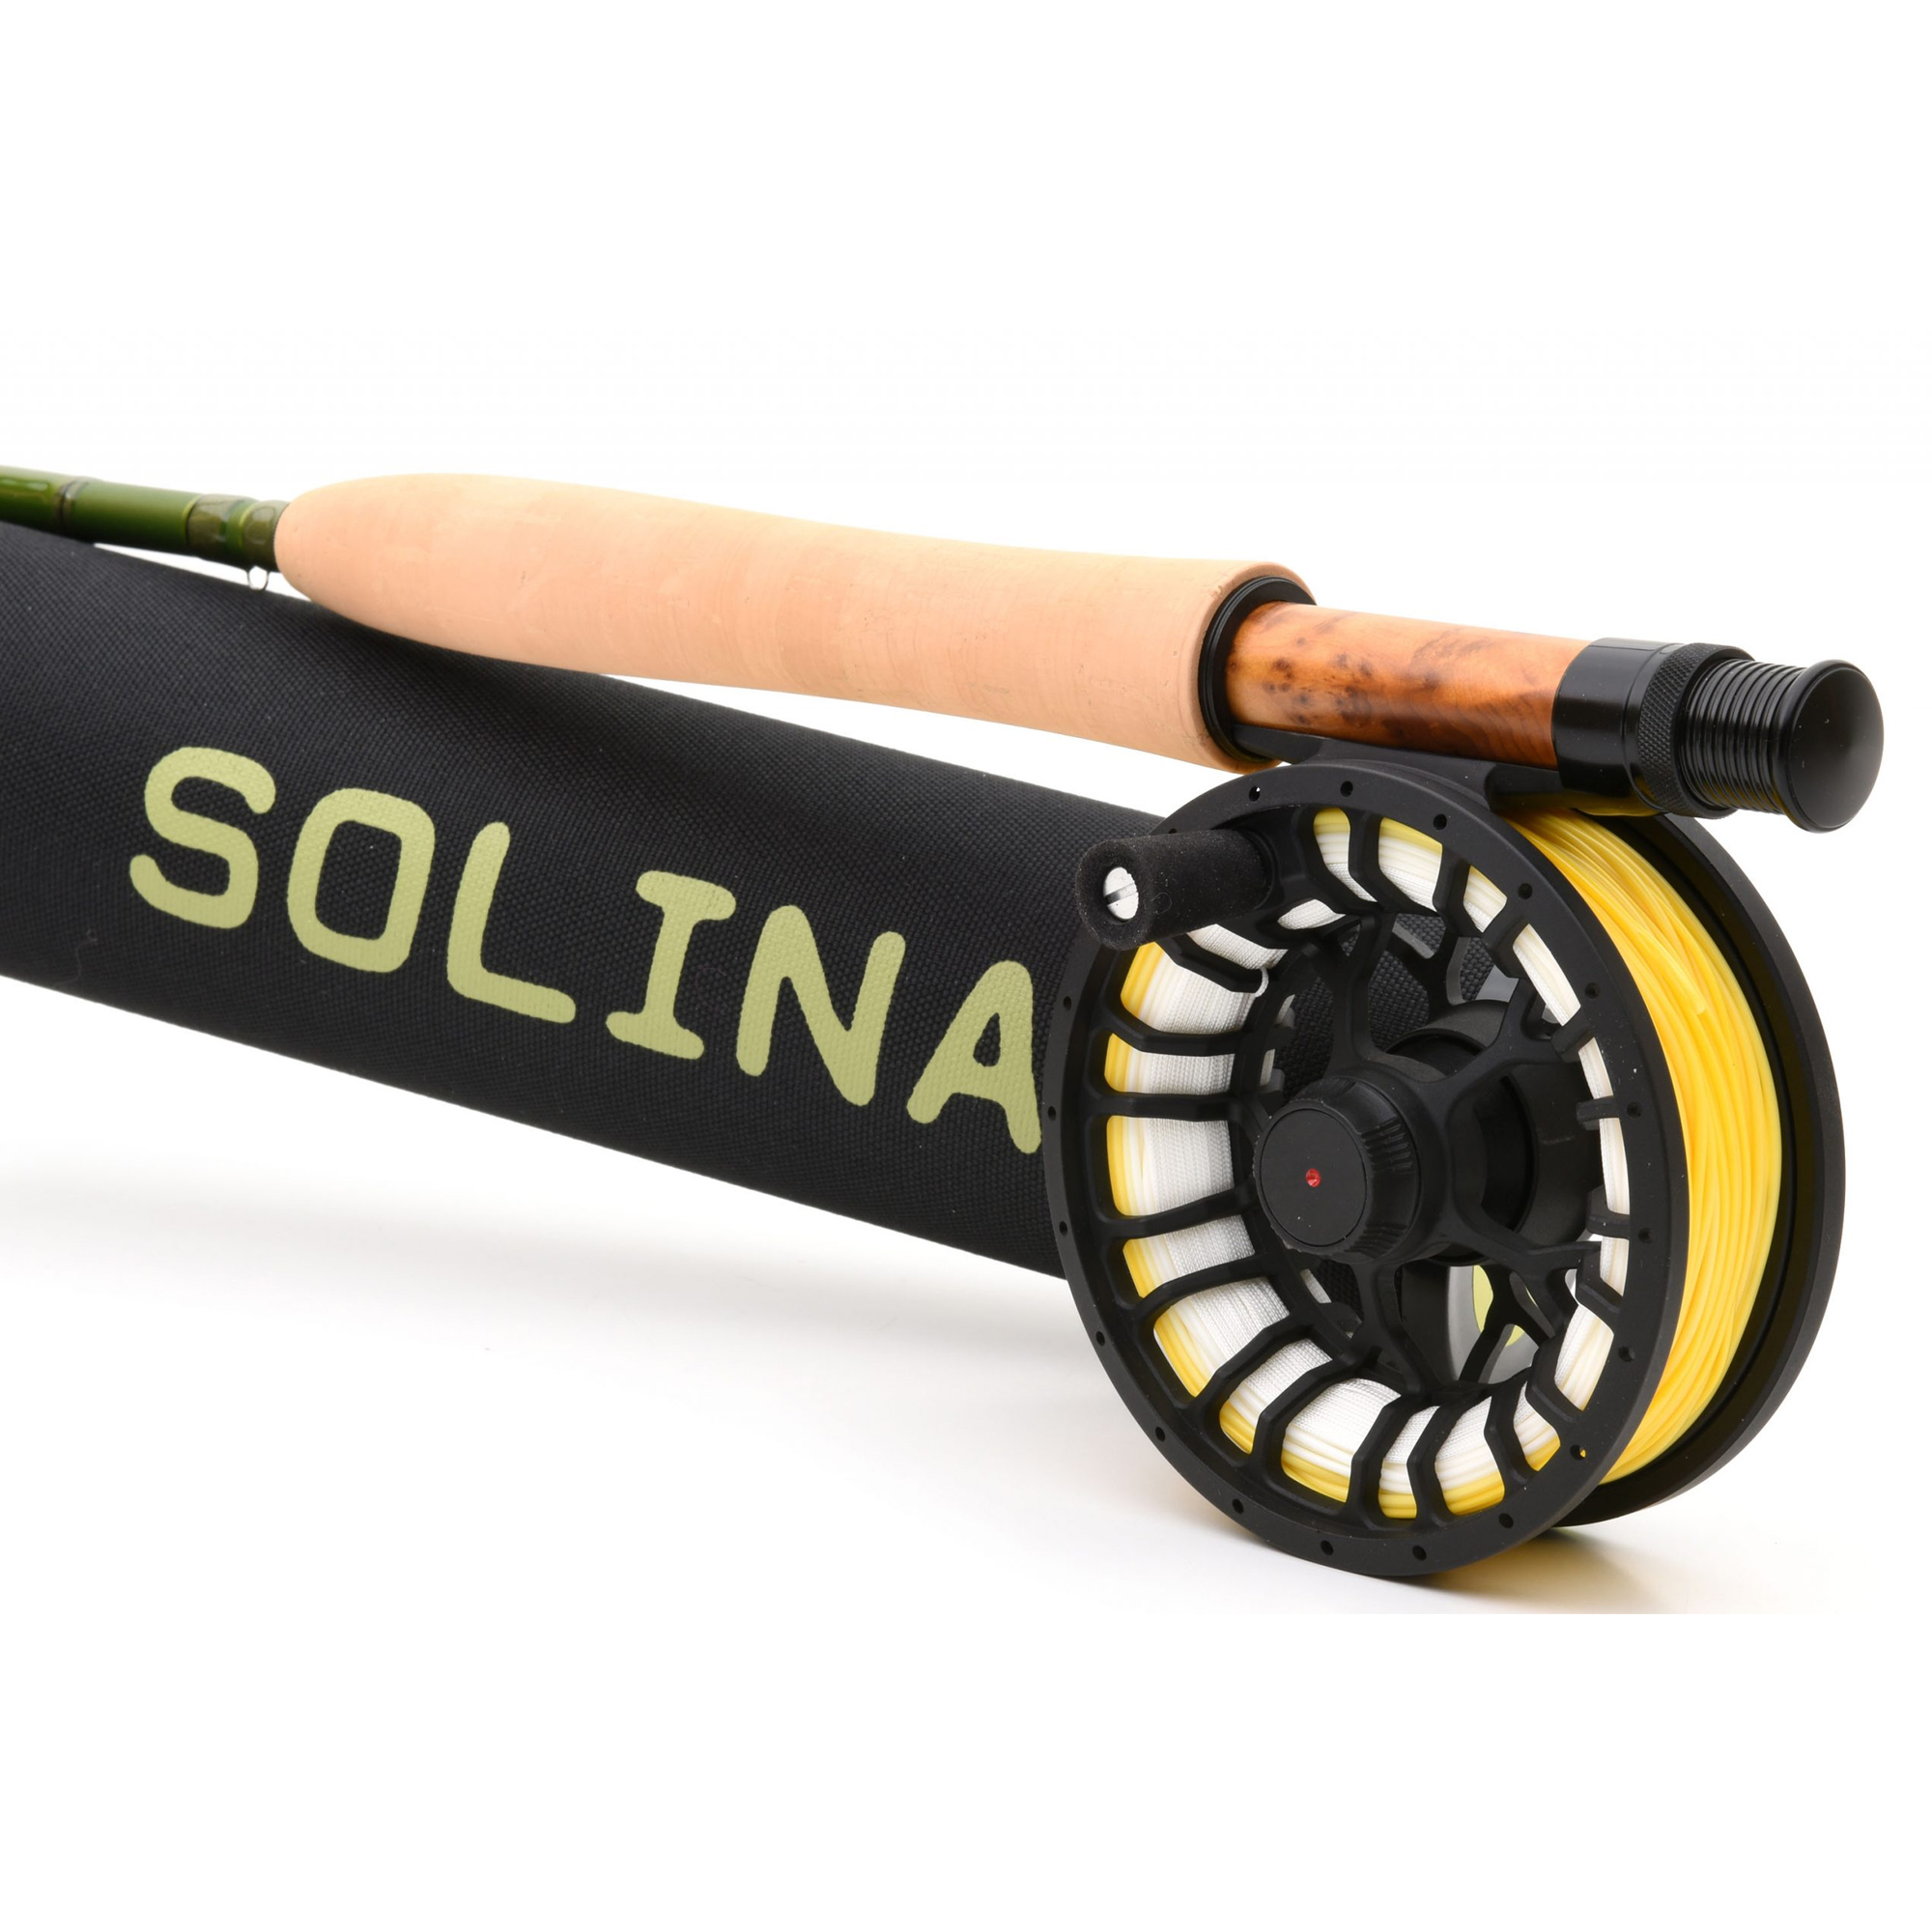 Vision Solina 2.0 Outfit – Guide Flyfishing, Fly Fishing Rods, Reels, Sage, Redington, RIO